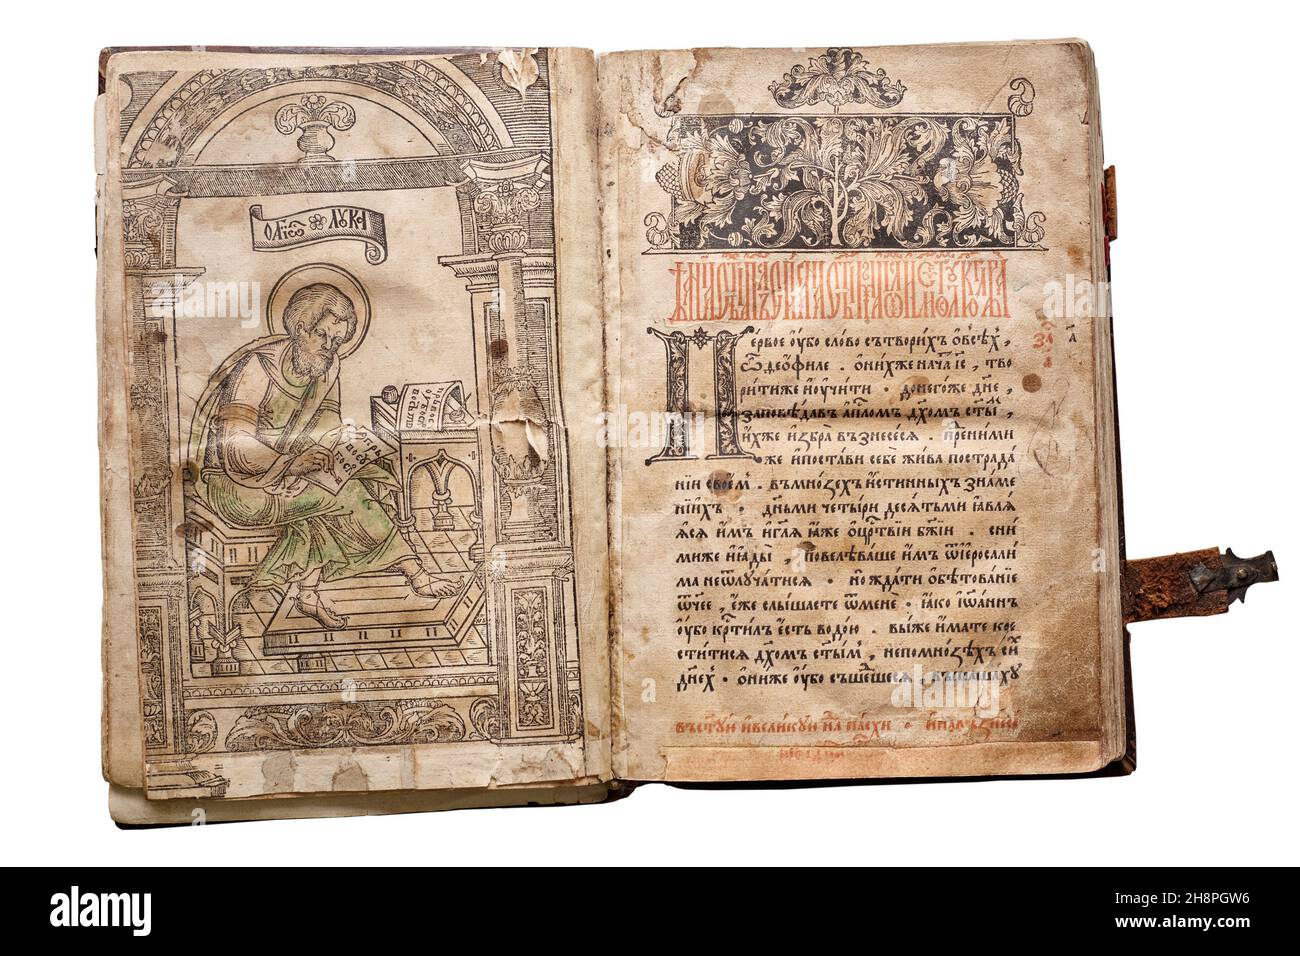 Lviv Apostle or Apostolic Messages in the Book of Acts. The first printed book in Ukraine, issued in February 1574 Ivan Fedorovich in Lviv. Stock Photo